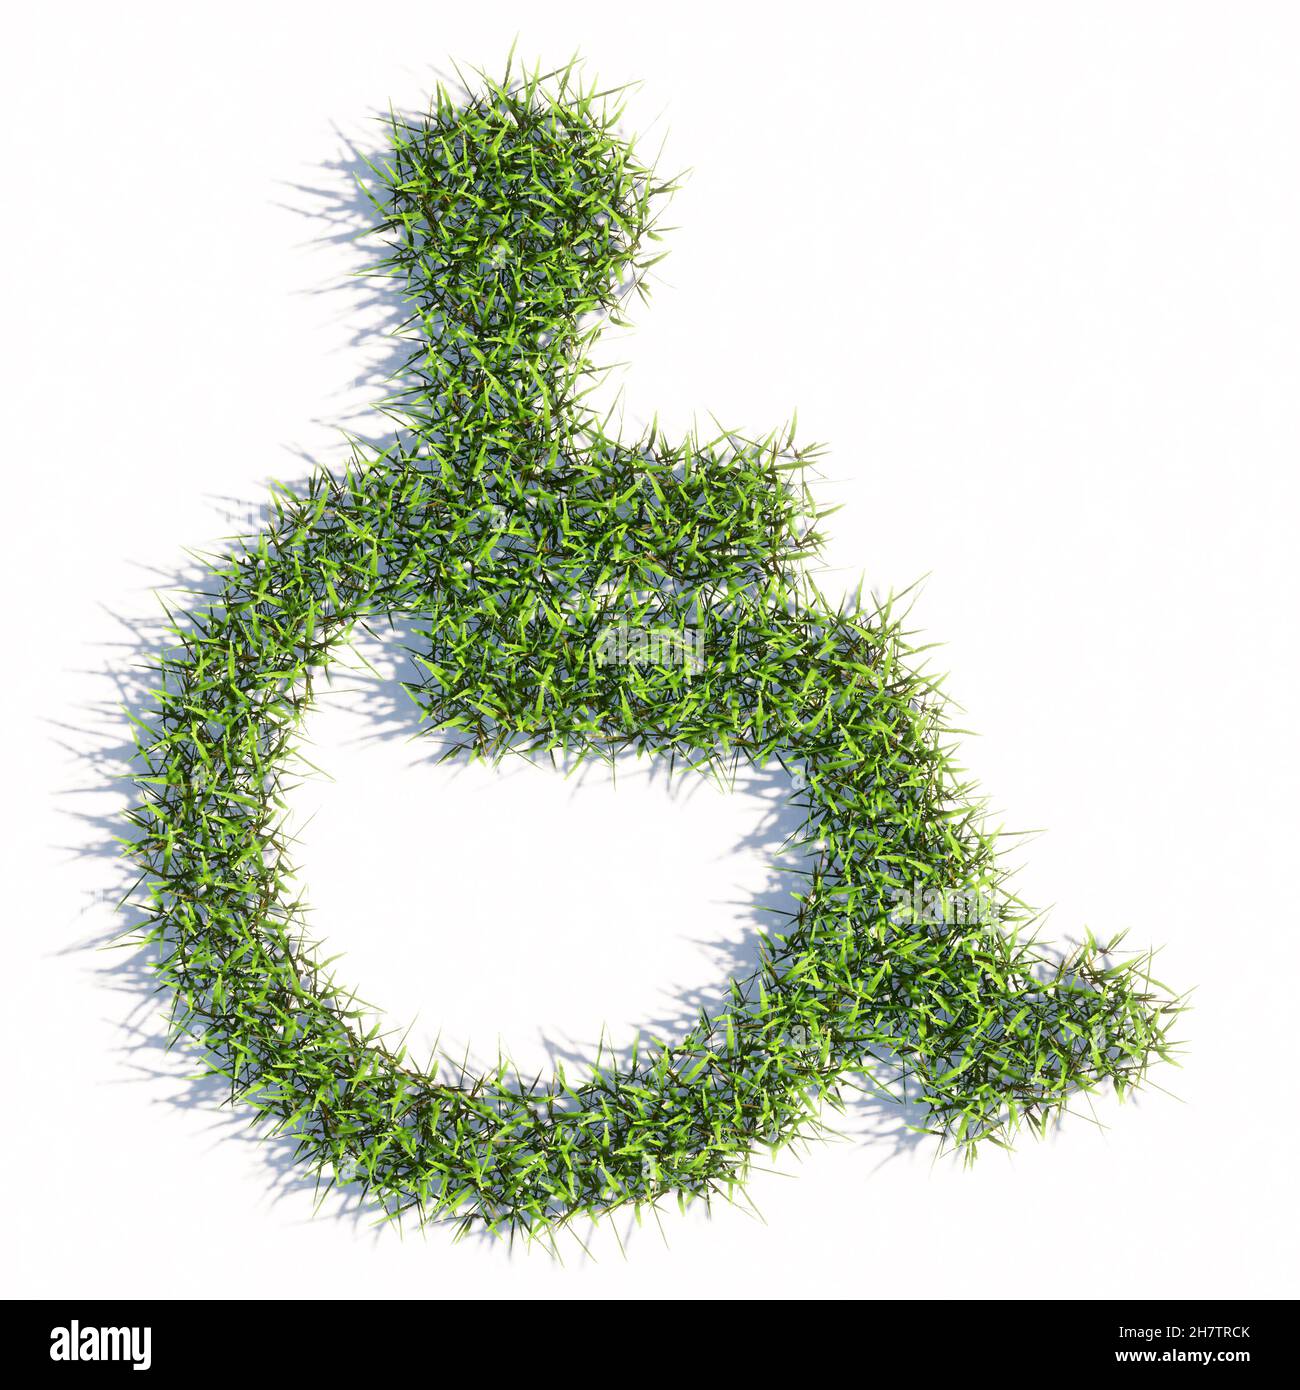 Concept or conceptual green summer lawn grass symbol isolated white background, wheel chair sign. 3d illustration metaphor for rehabilitation Stock Photo